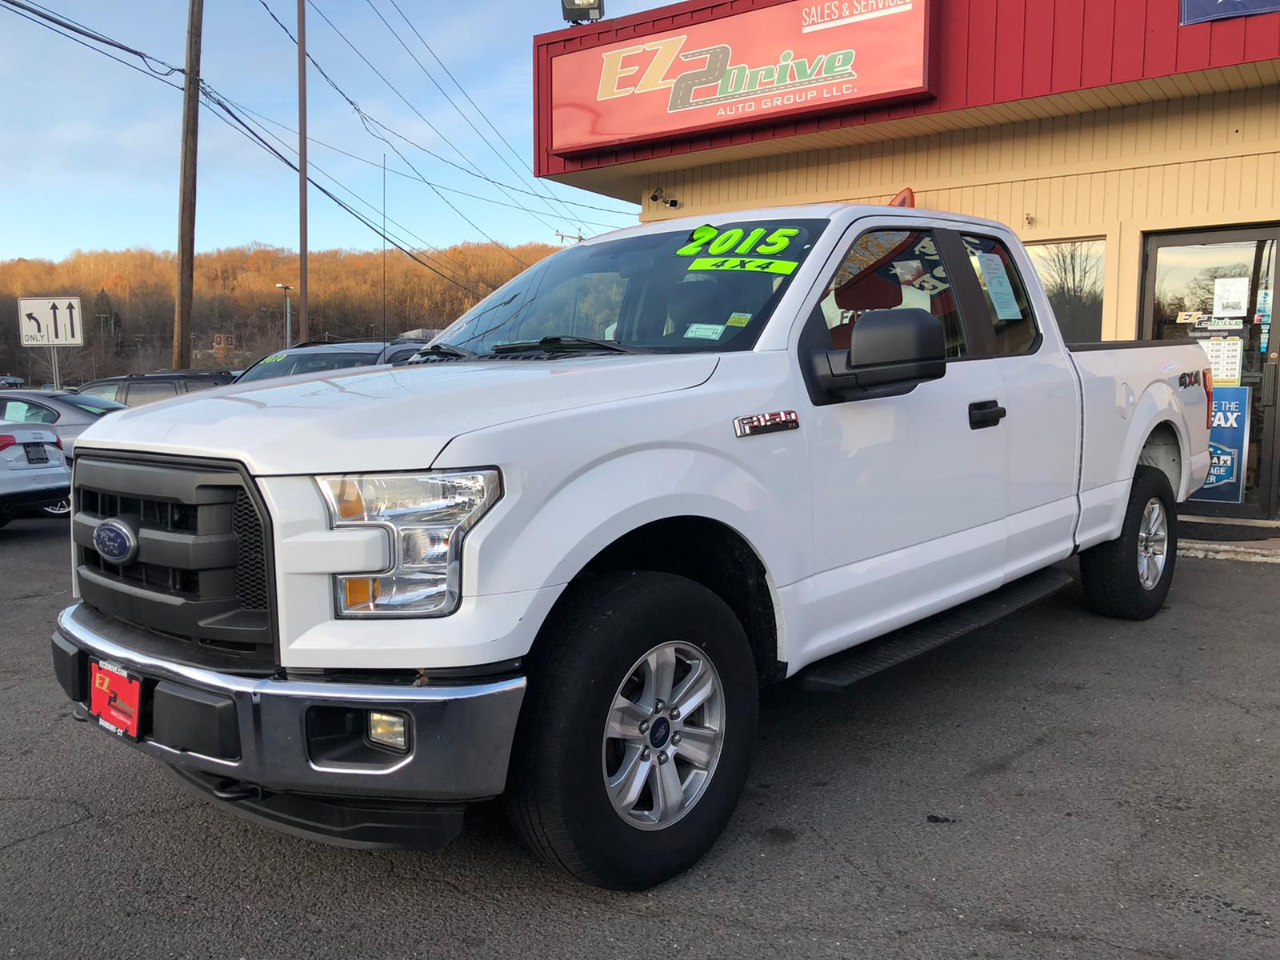 Used 2015 Ford F 150 Lariat Supercab 6 5 Ft Bed 4wd For